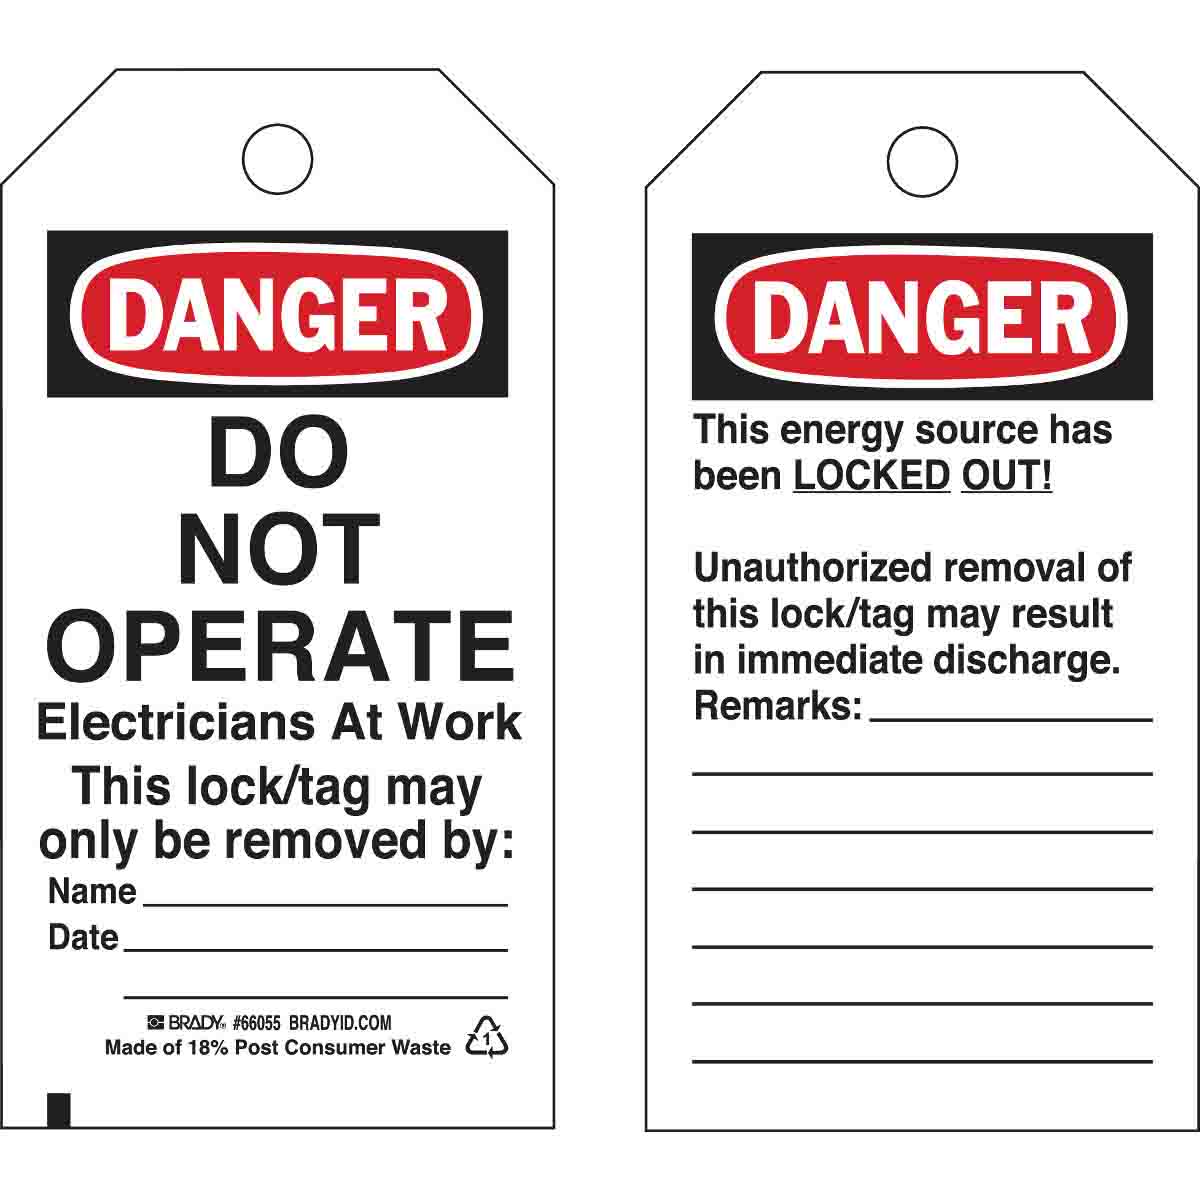 25 pack of Danger Do Not Operate Safety Lockout tags 